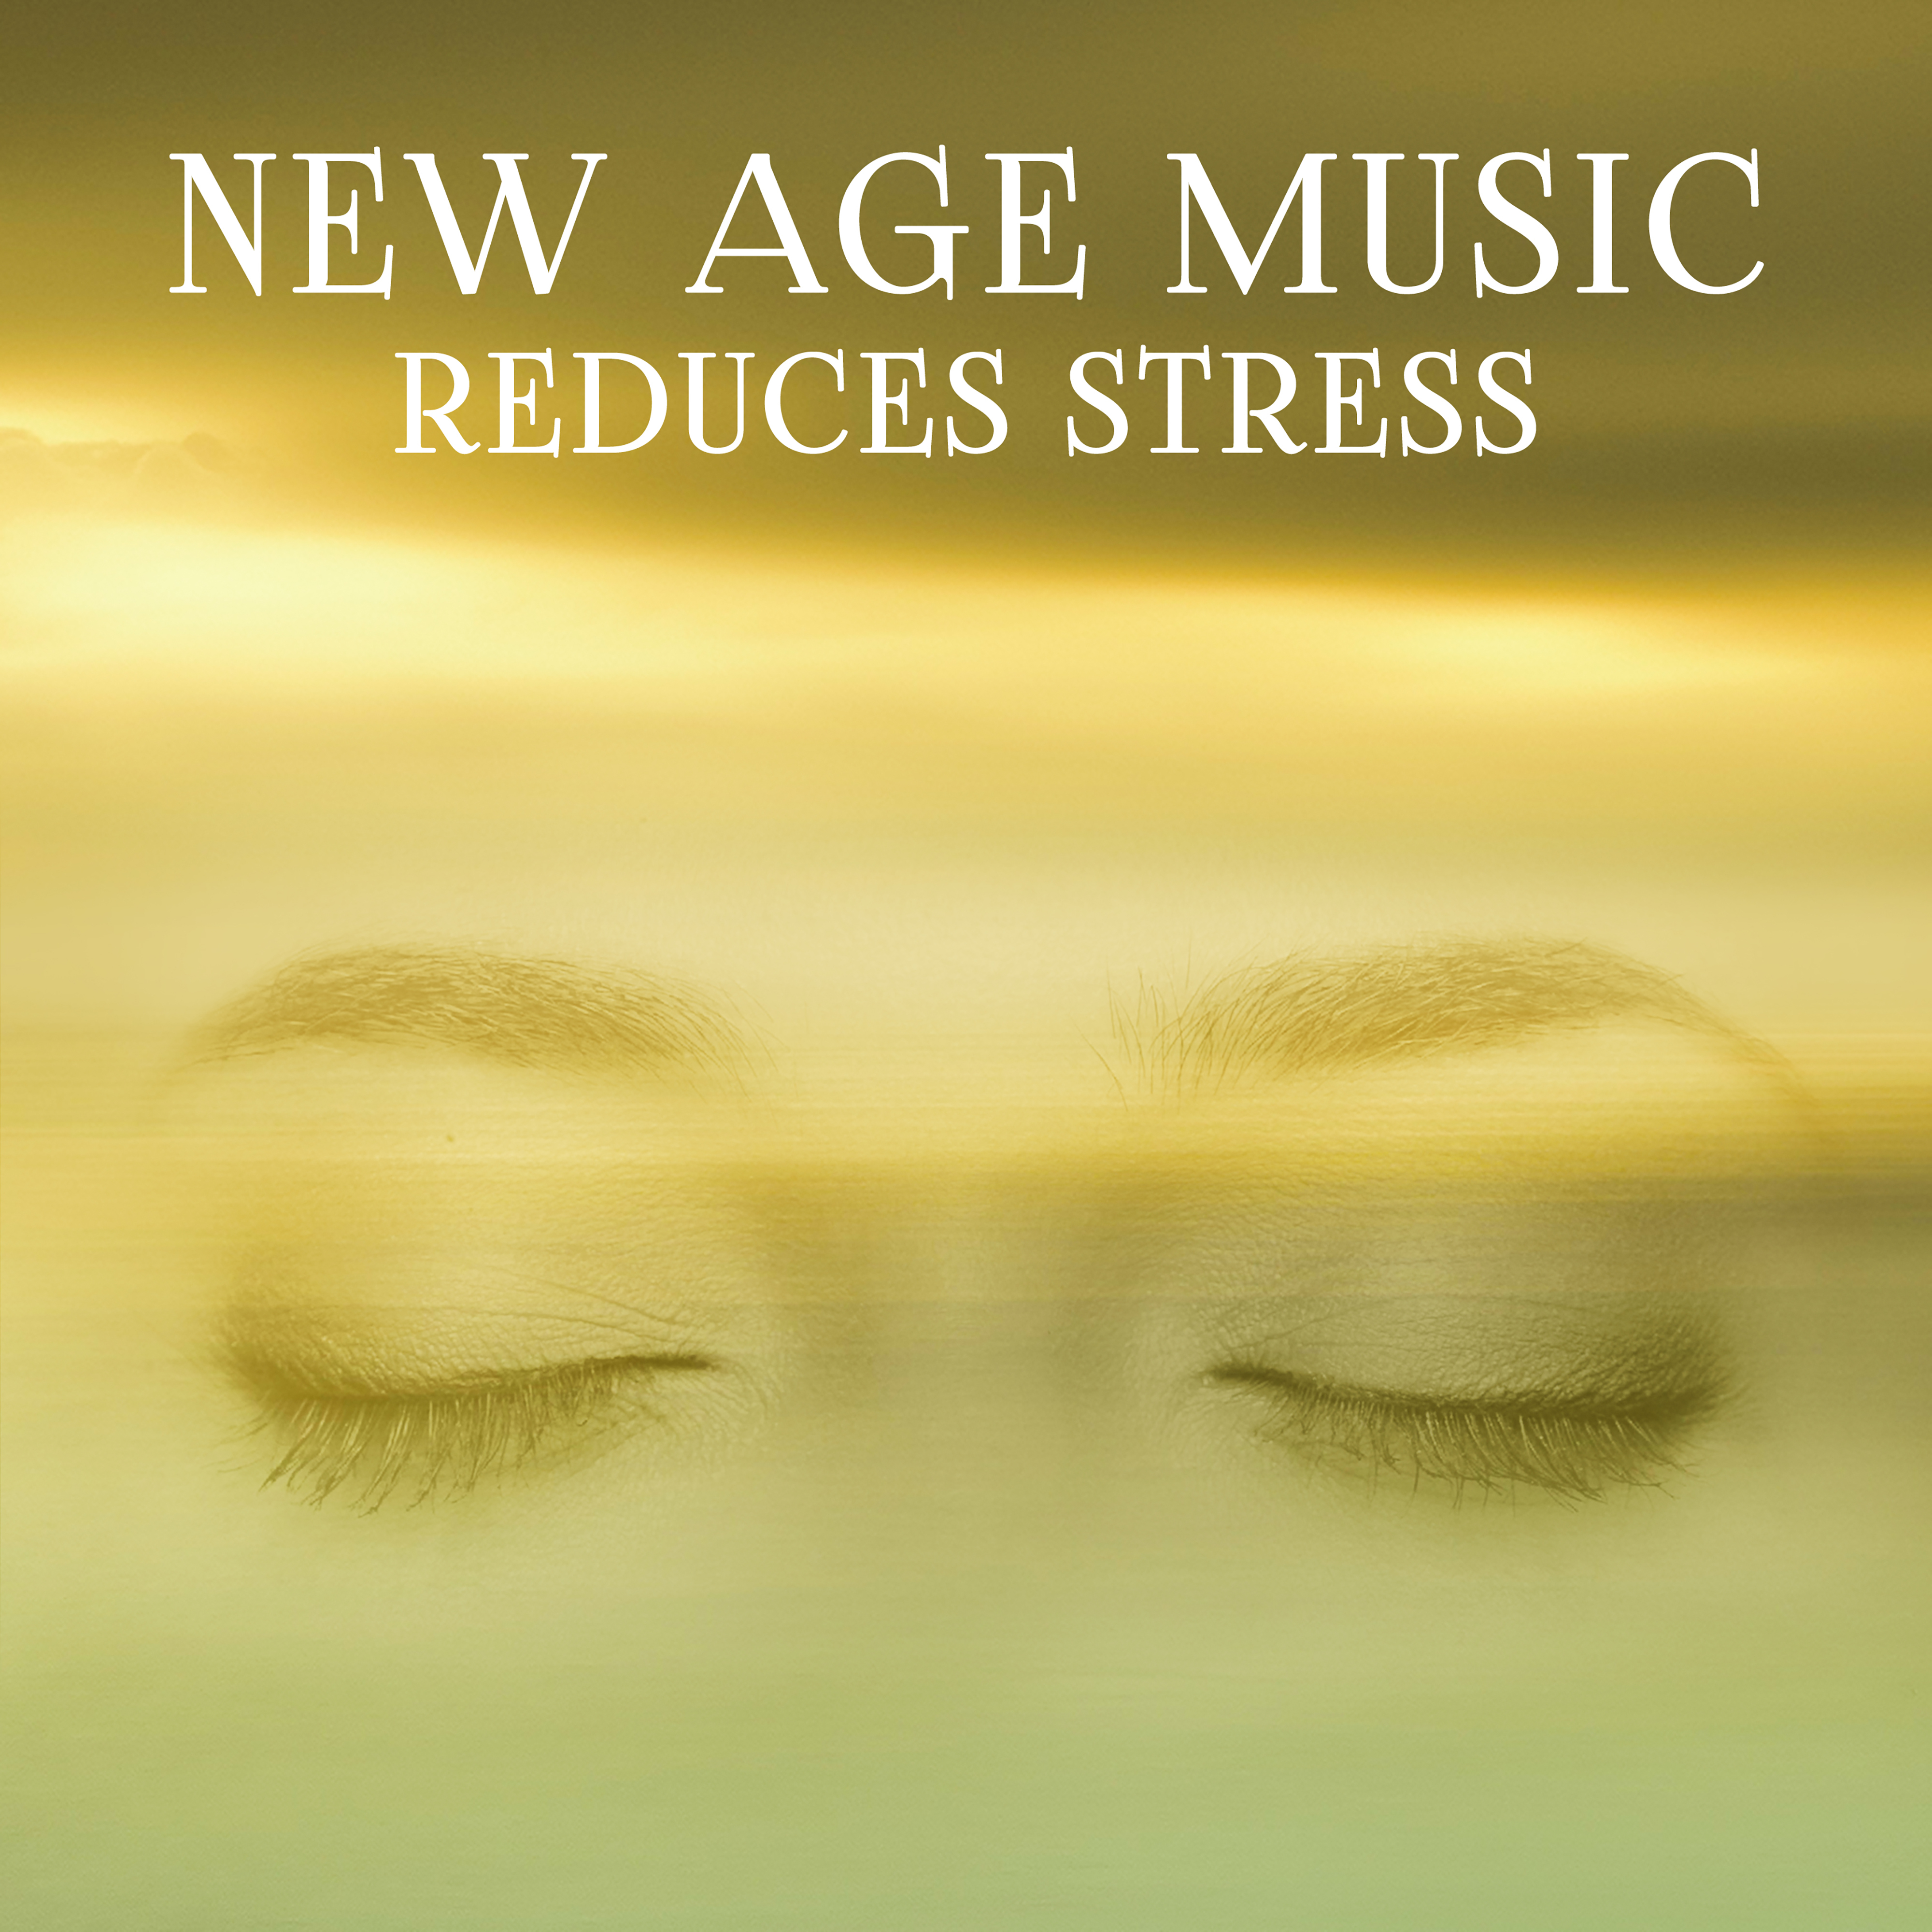 New Age Music Reduces Stress – Calm Down, Healing Lullabies, Stress Free, Soft Sounds for Relaxation, Sleep, Pure Mind